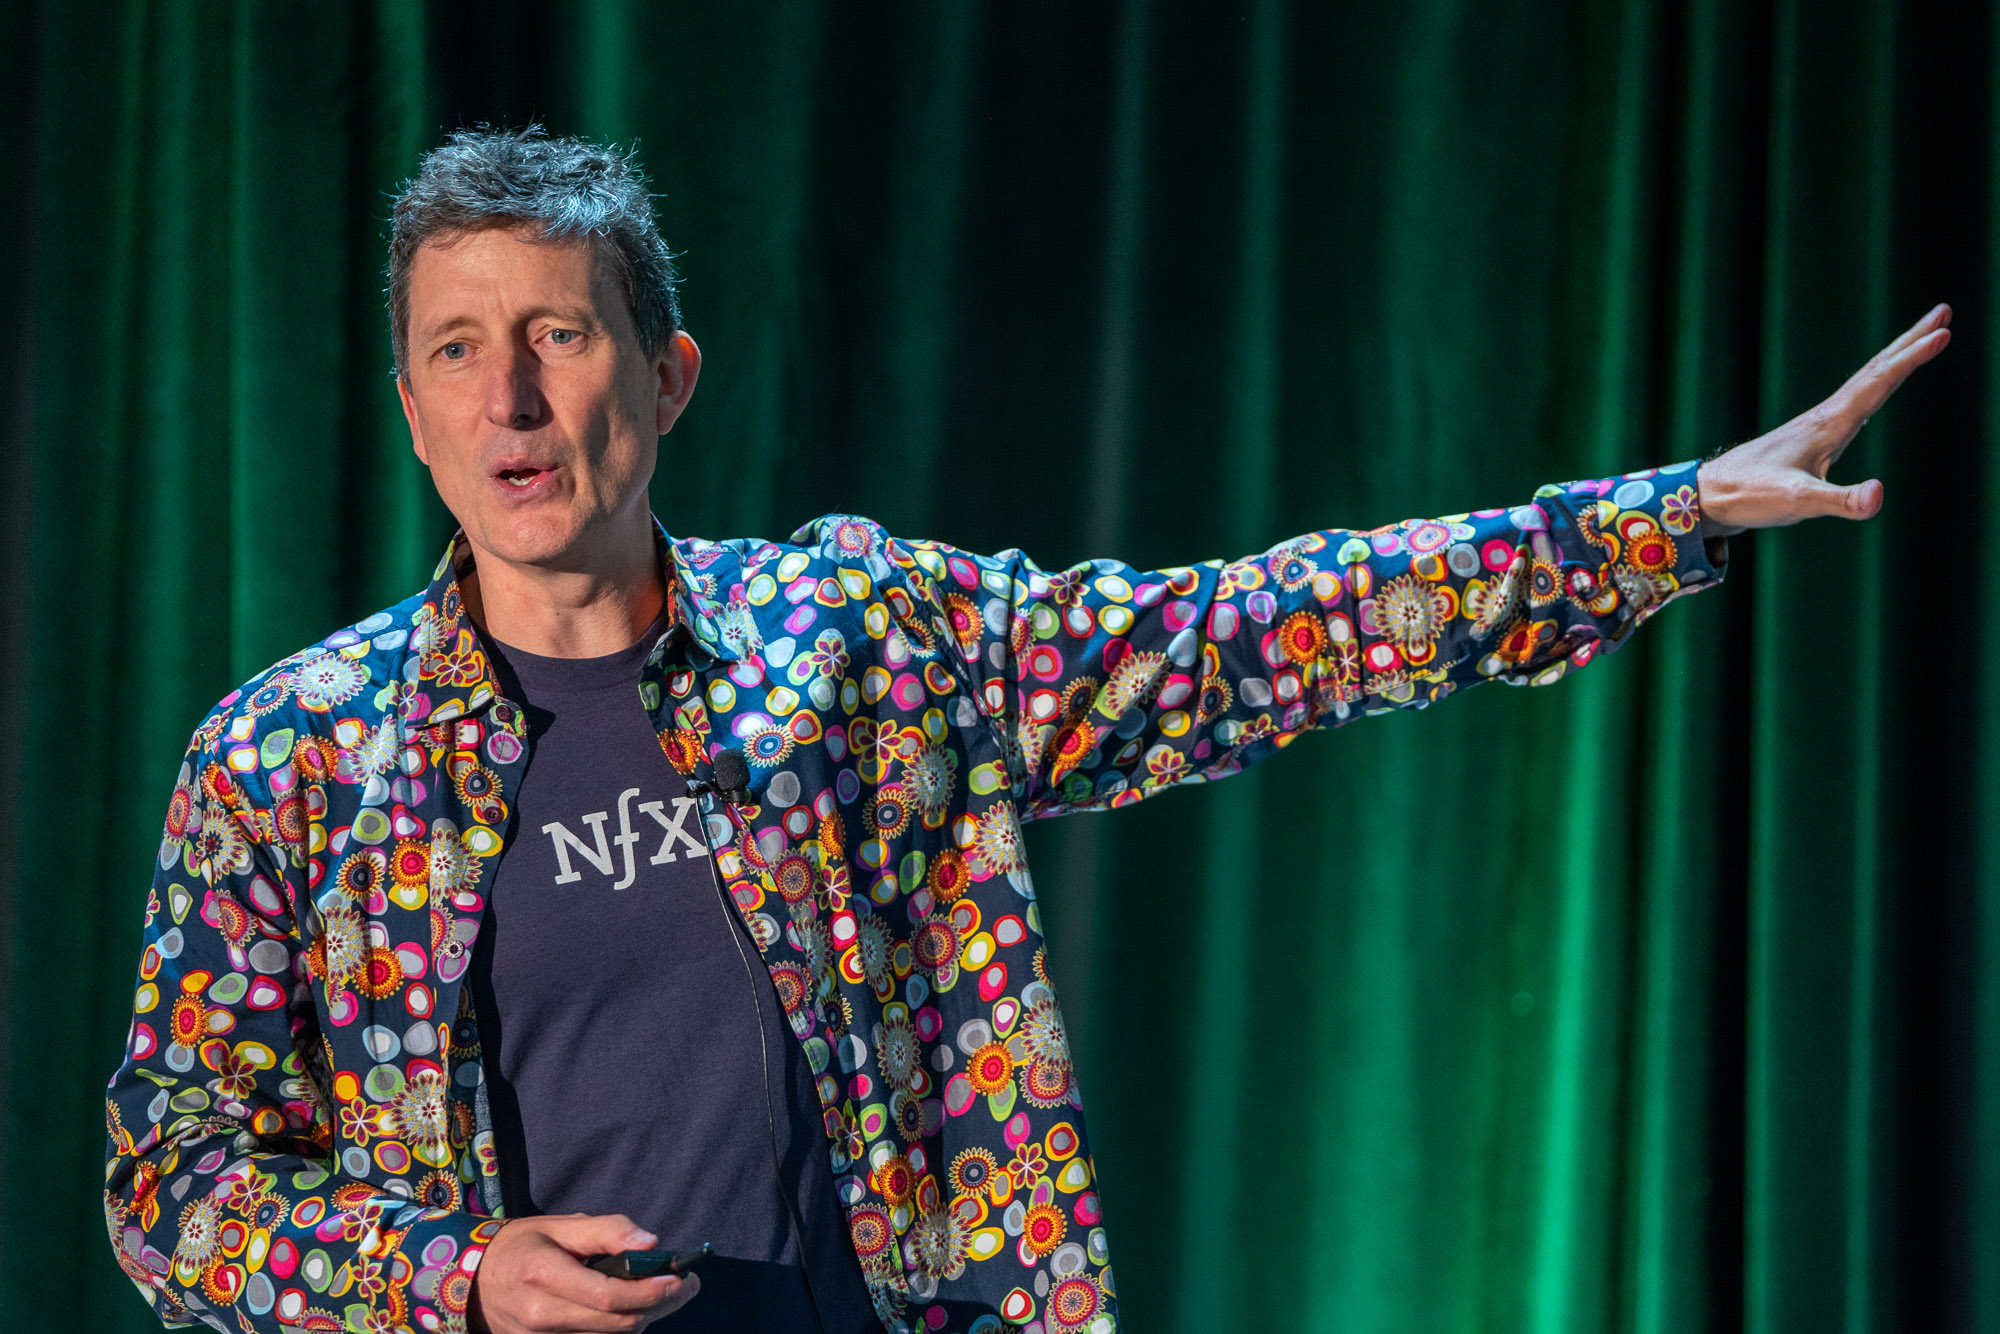 James Currier, GP at NfX talks about "Where unicorn ideas come from" at MinRegion Early Stage in Boston on April 20, 2023. Image Credit: Haje Kamps/MinRegion